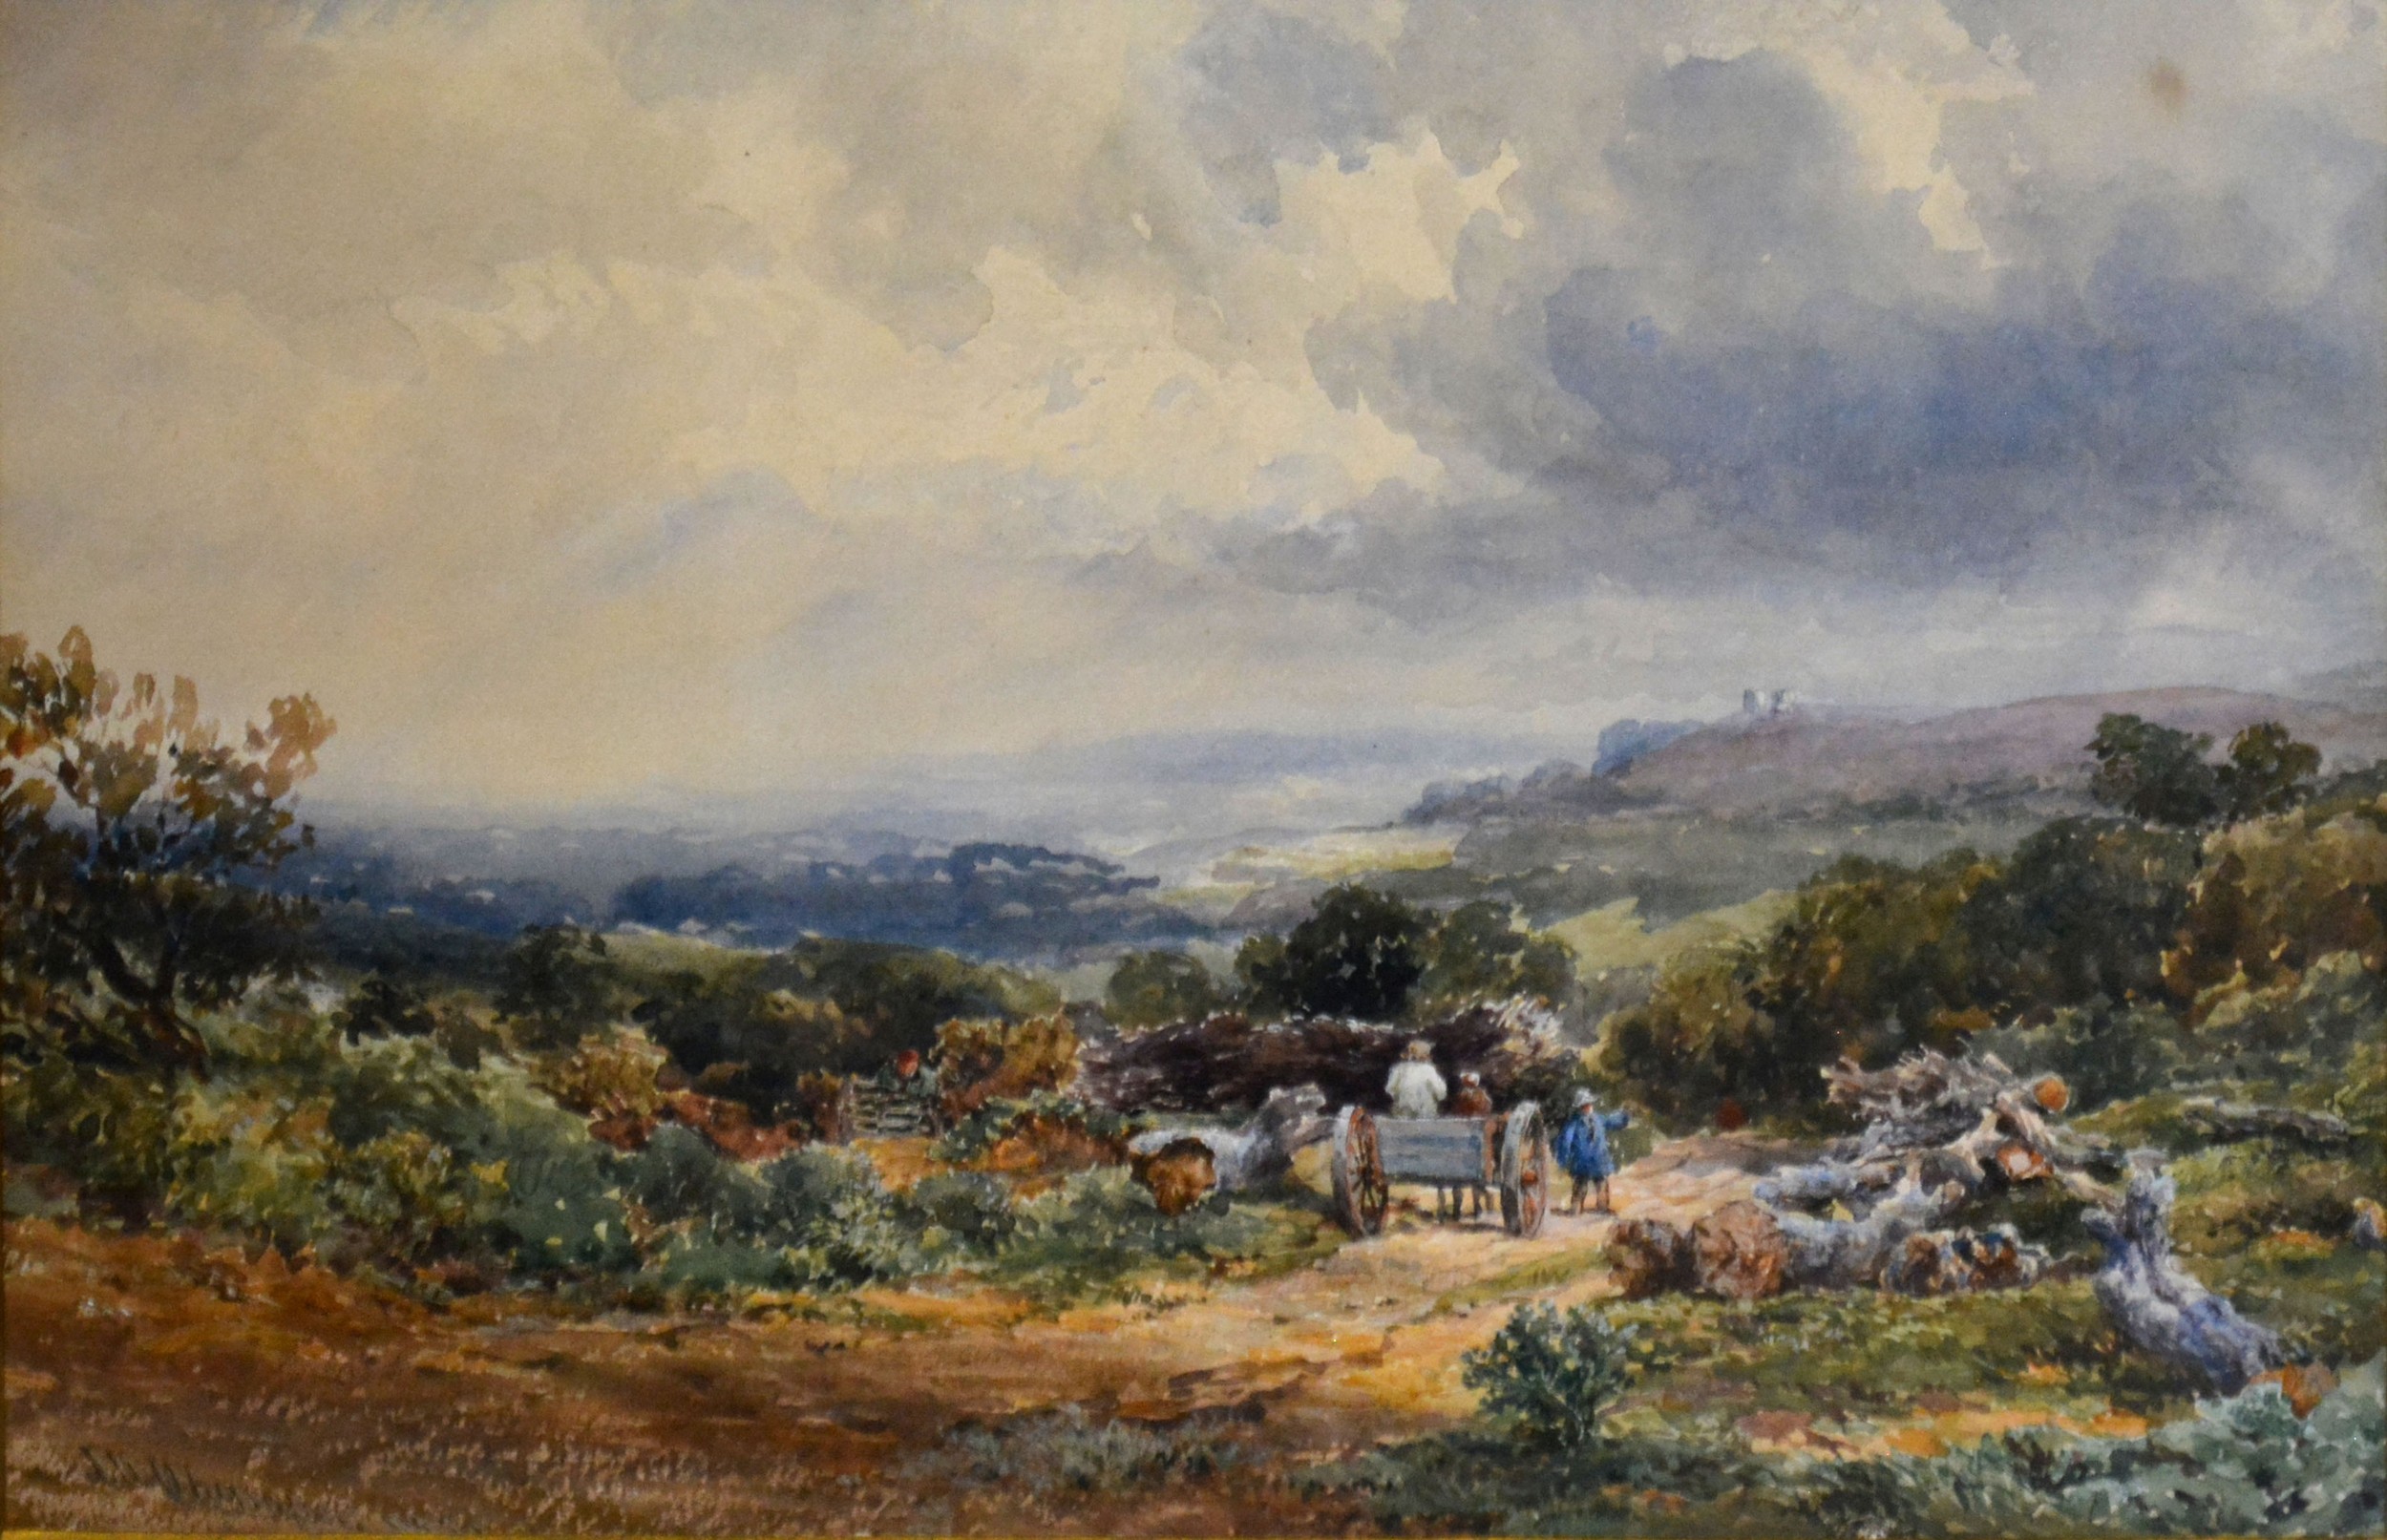 Josia Wood Whymper 'Figures with a Cart on a Track within a Landscape' 24 x 35 cms watercolour